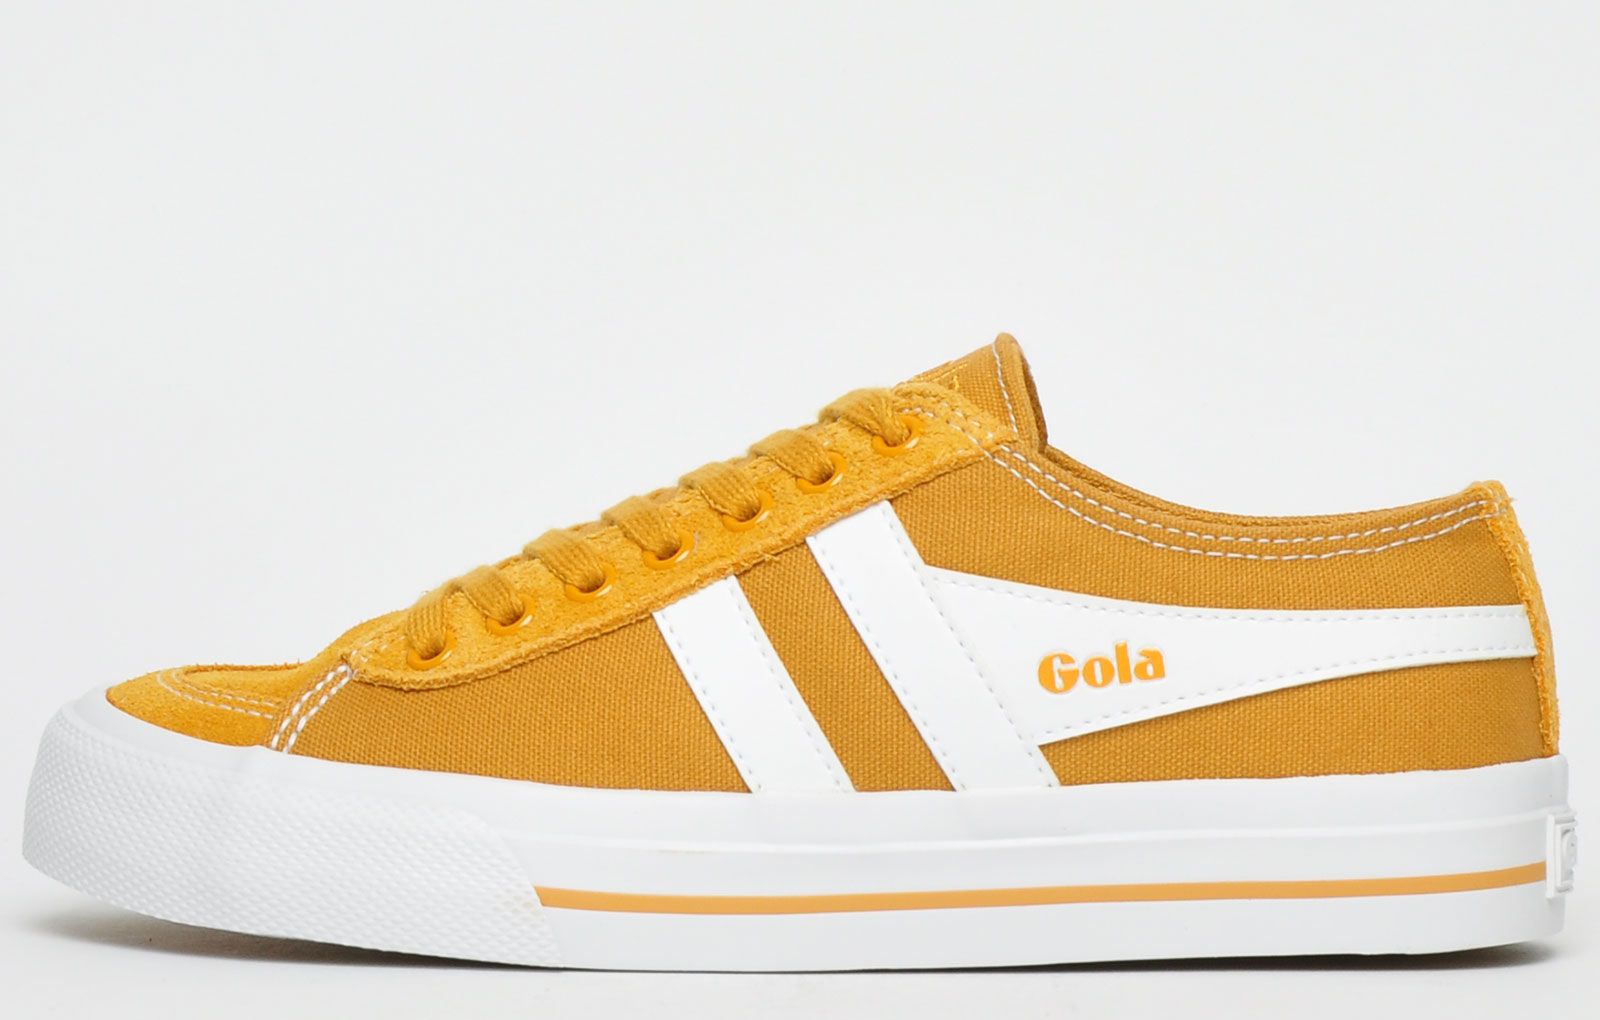 <p>These Gola Classics Quota II women’s girls trainers feature a timeless plimsol silhouette, delivering a touch of vintage charm to your casual footwear collection. A padded insole for that extra comfort along with a secure lace-up system for security delivers great everyday wear. Complete with a partial suede leather upper to add depth and even more character</p> <p>The Quota II is delivered in a robust canvas textile construction for a vintage retro style with a contrasting white Gola wingflash and on-trend deep foxing providing a classic style that will never go out of fashion.</p> <p> - Gola Classics plimsol silhouette</p> <p>- Secure lace up fastening</p> <p> - Canvas textile upper enhances ventilation.</p> <p>- Suede leather toe box and trims</p> <p>- Cushioned insole delivers a comfortable fit</p> <p> - Vulcanised sole</p> <p> - Gola Classics branding throughout</p>